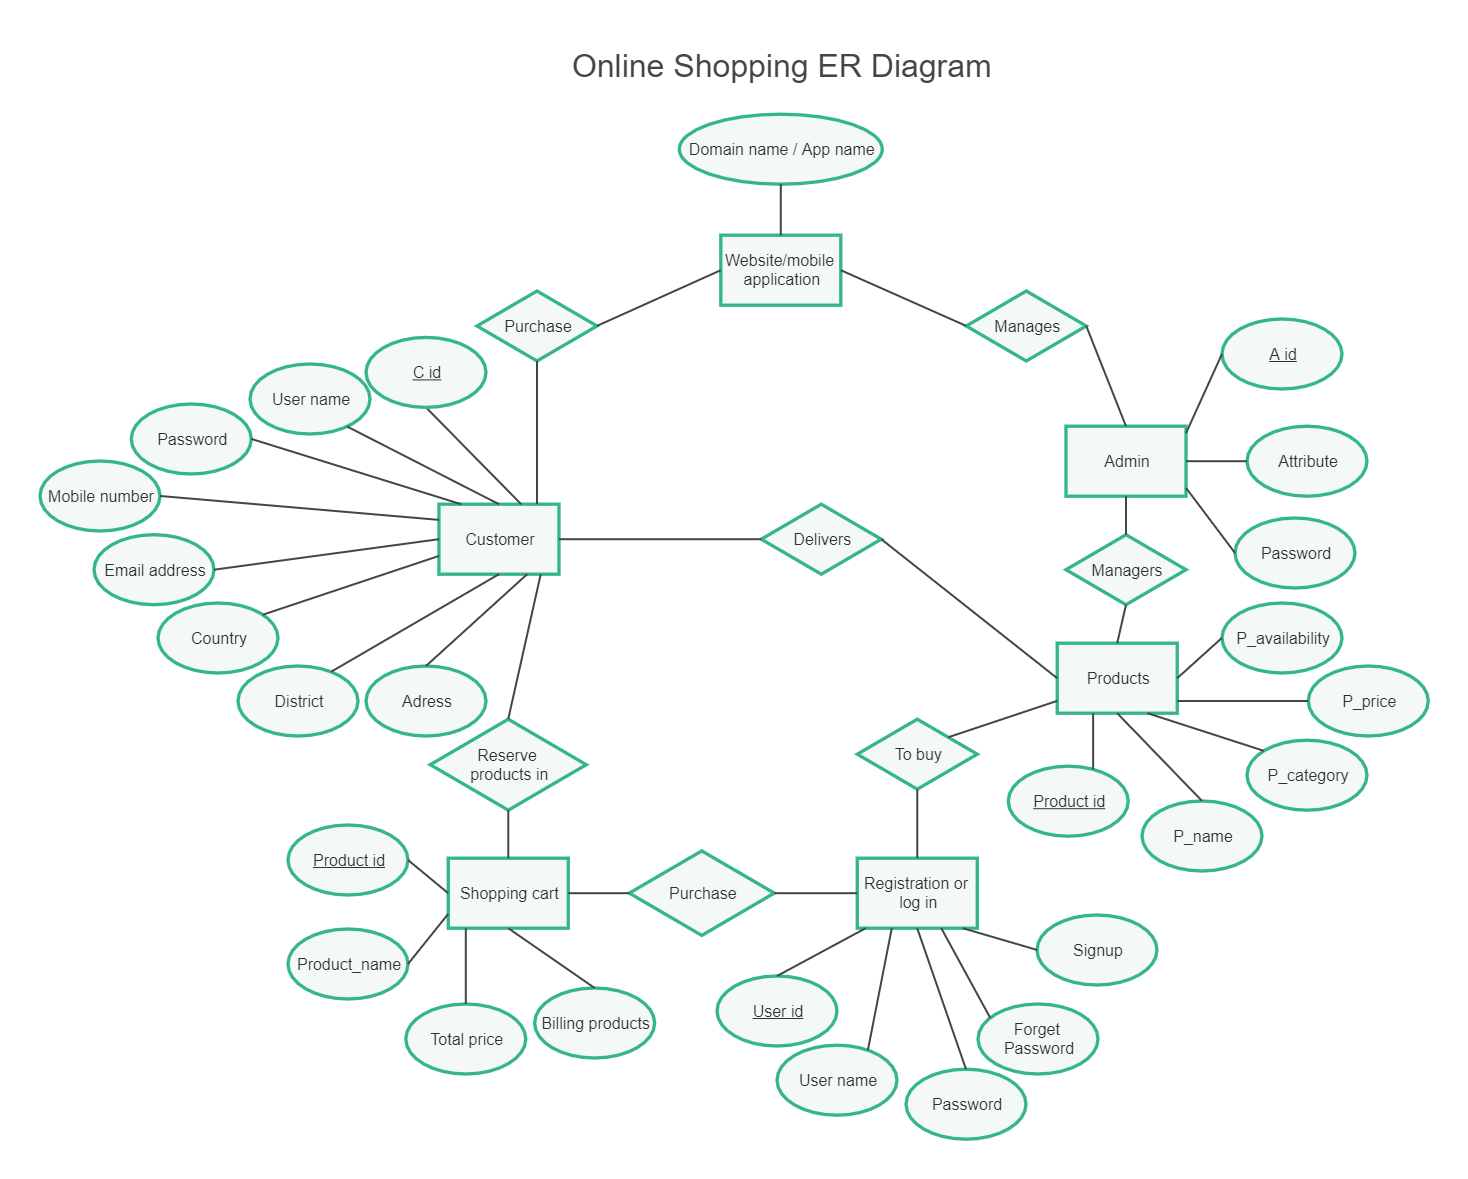 An ER diagram or Entity Relationship Diagram (ERD) is a type of flowchart or graphical approach that helps you illustrate how different entities relate to each other. It is a standard way of modeling databases and business processes. An ERD comprises seve